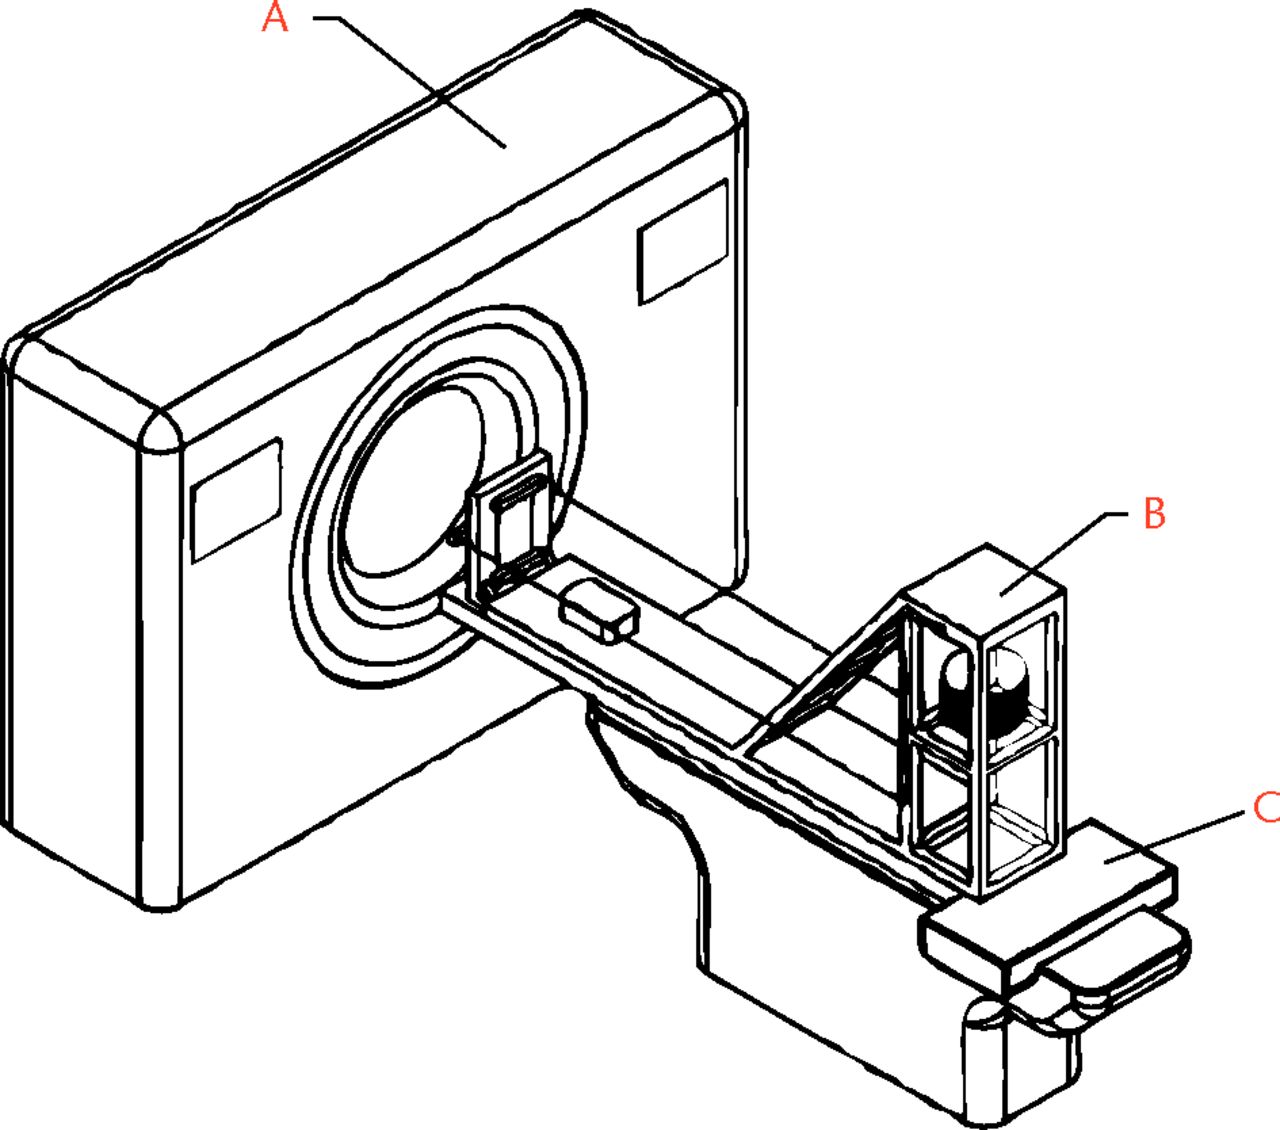 Fig. 1 
          Diagram of the computed tomography
(CT) set-up, showing a) the scanner tube, b) the foot loading device
and c) the scanner bed.
        